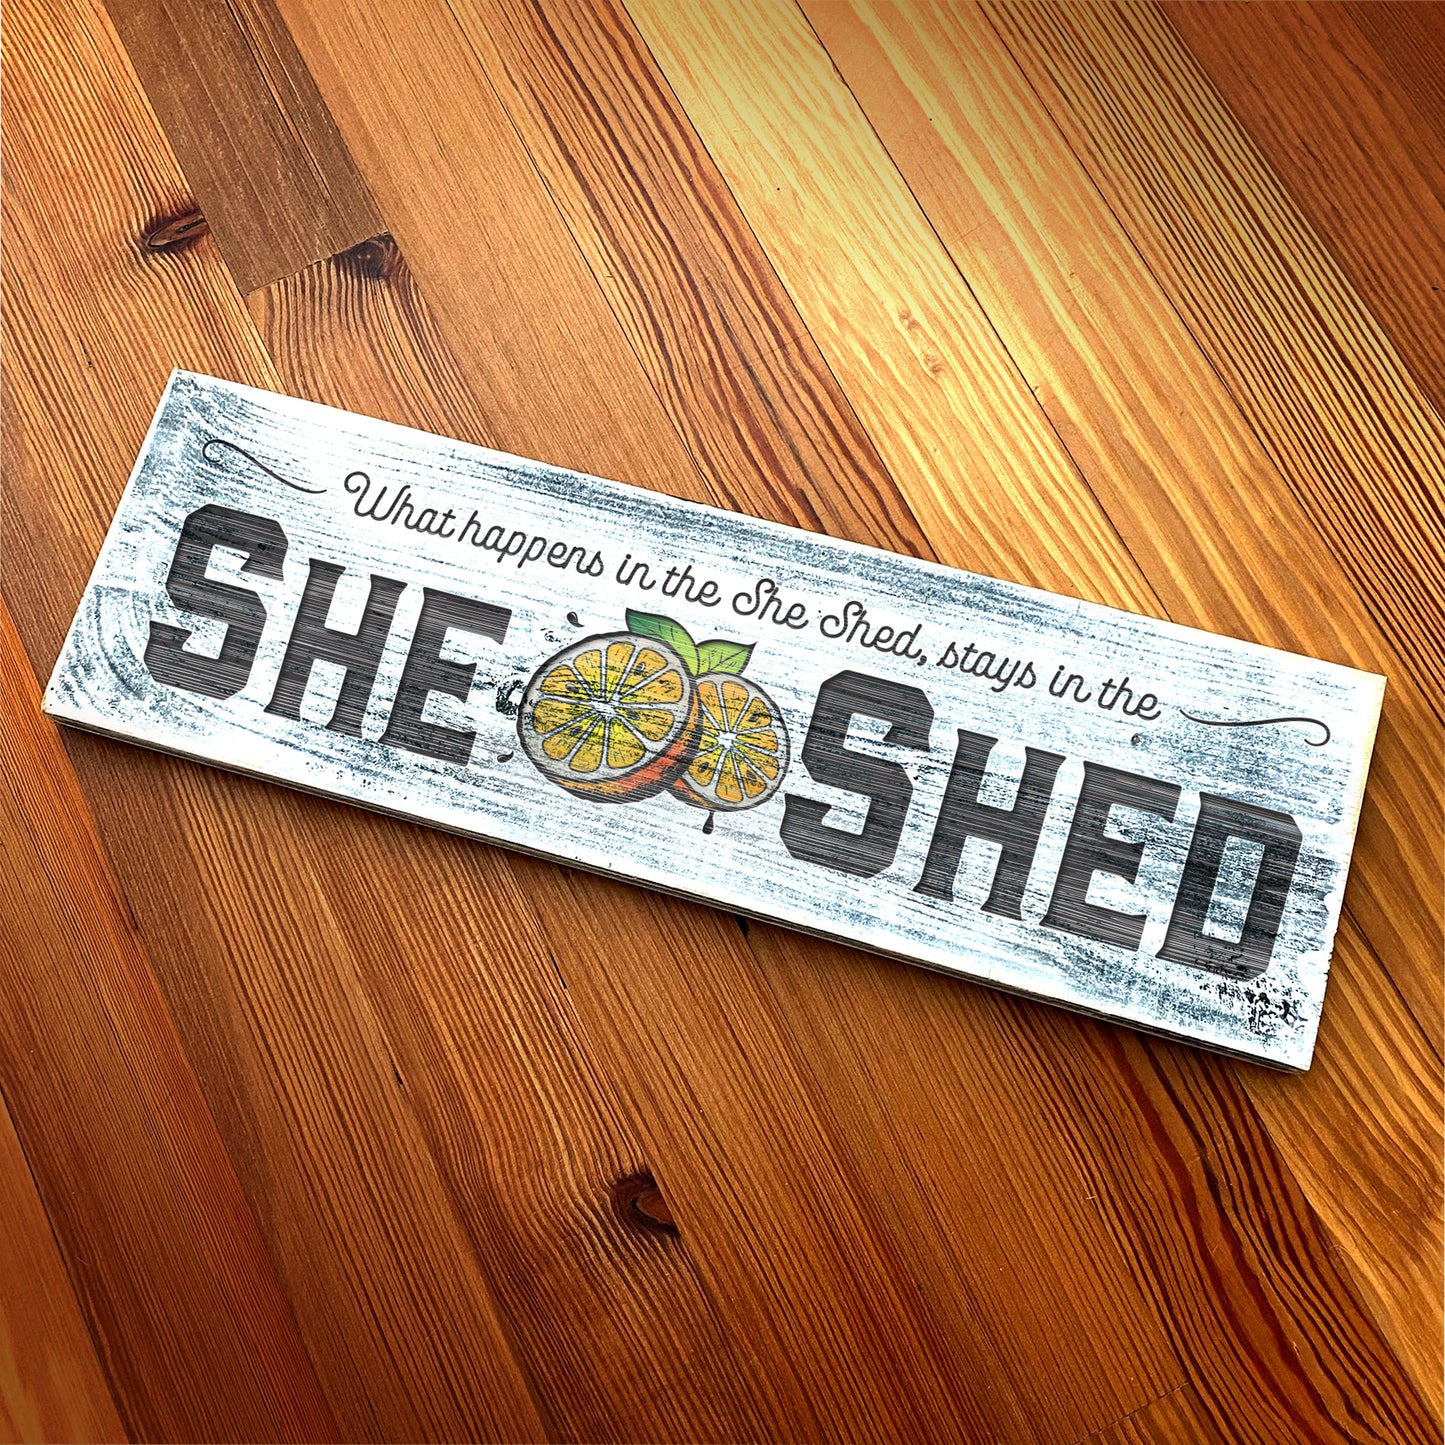 She Shed - Handcrafted Artisan Wood Sign